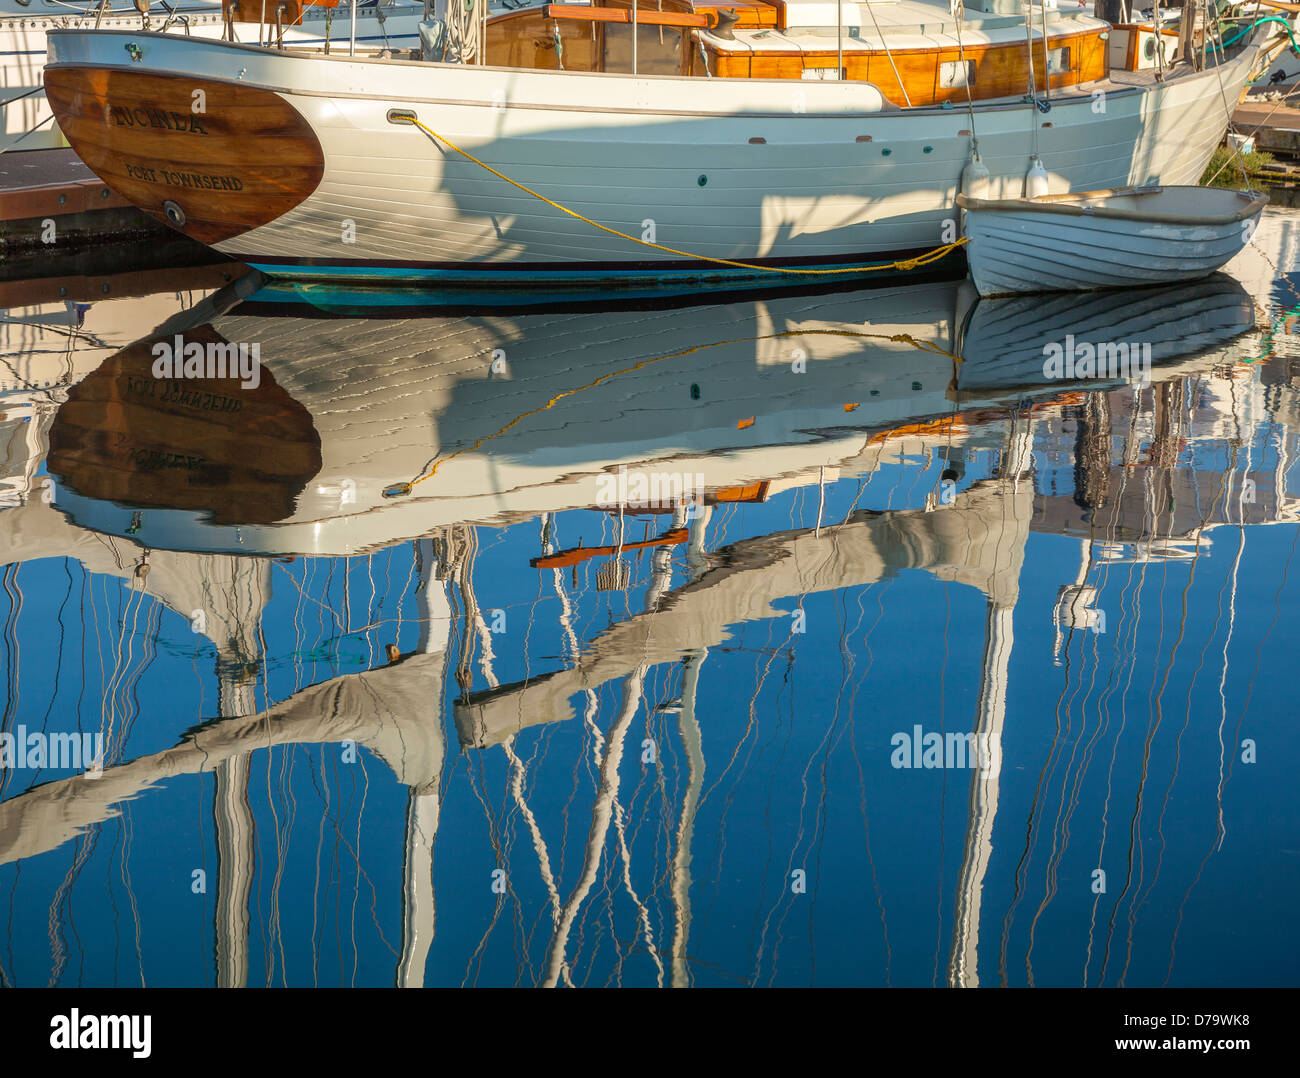 Port Townsend, Washington: Boats and reflections at the Port Townsend Marina on Puget Sound Stock Photo